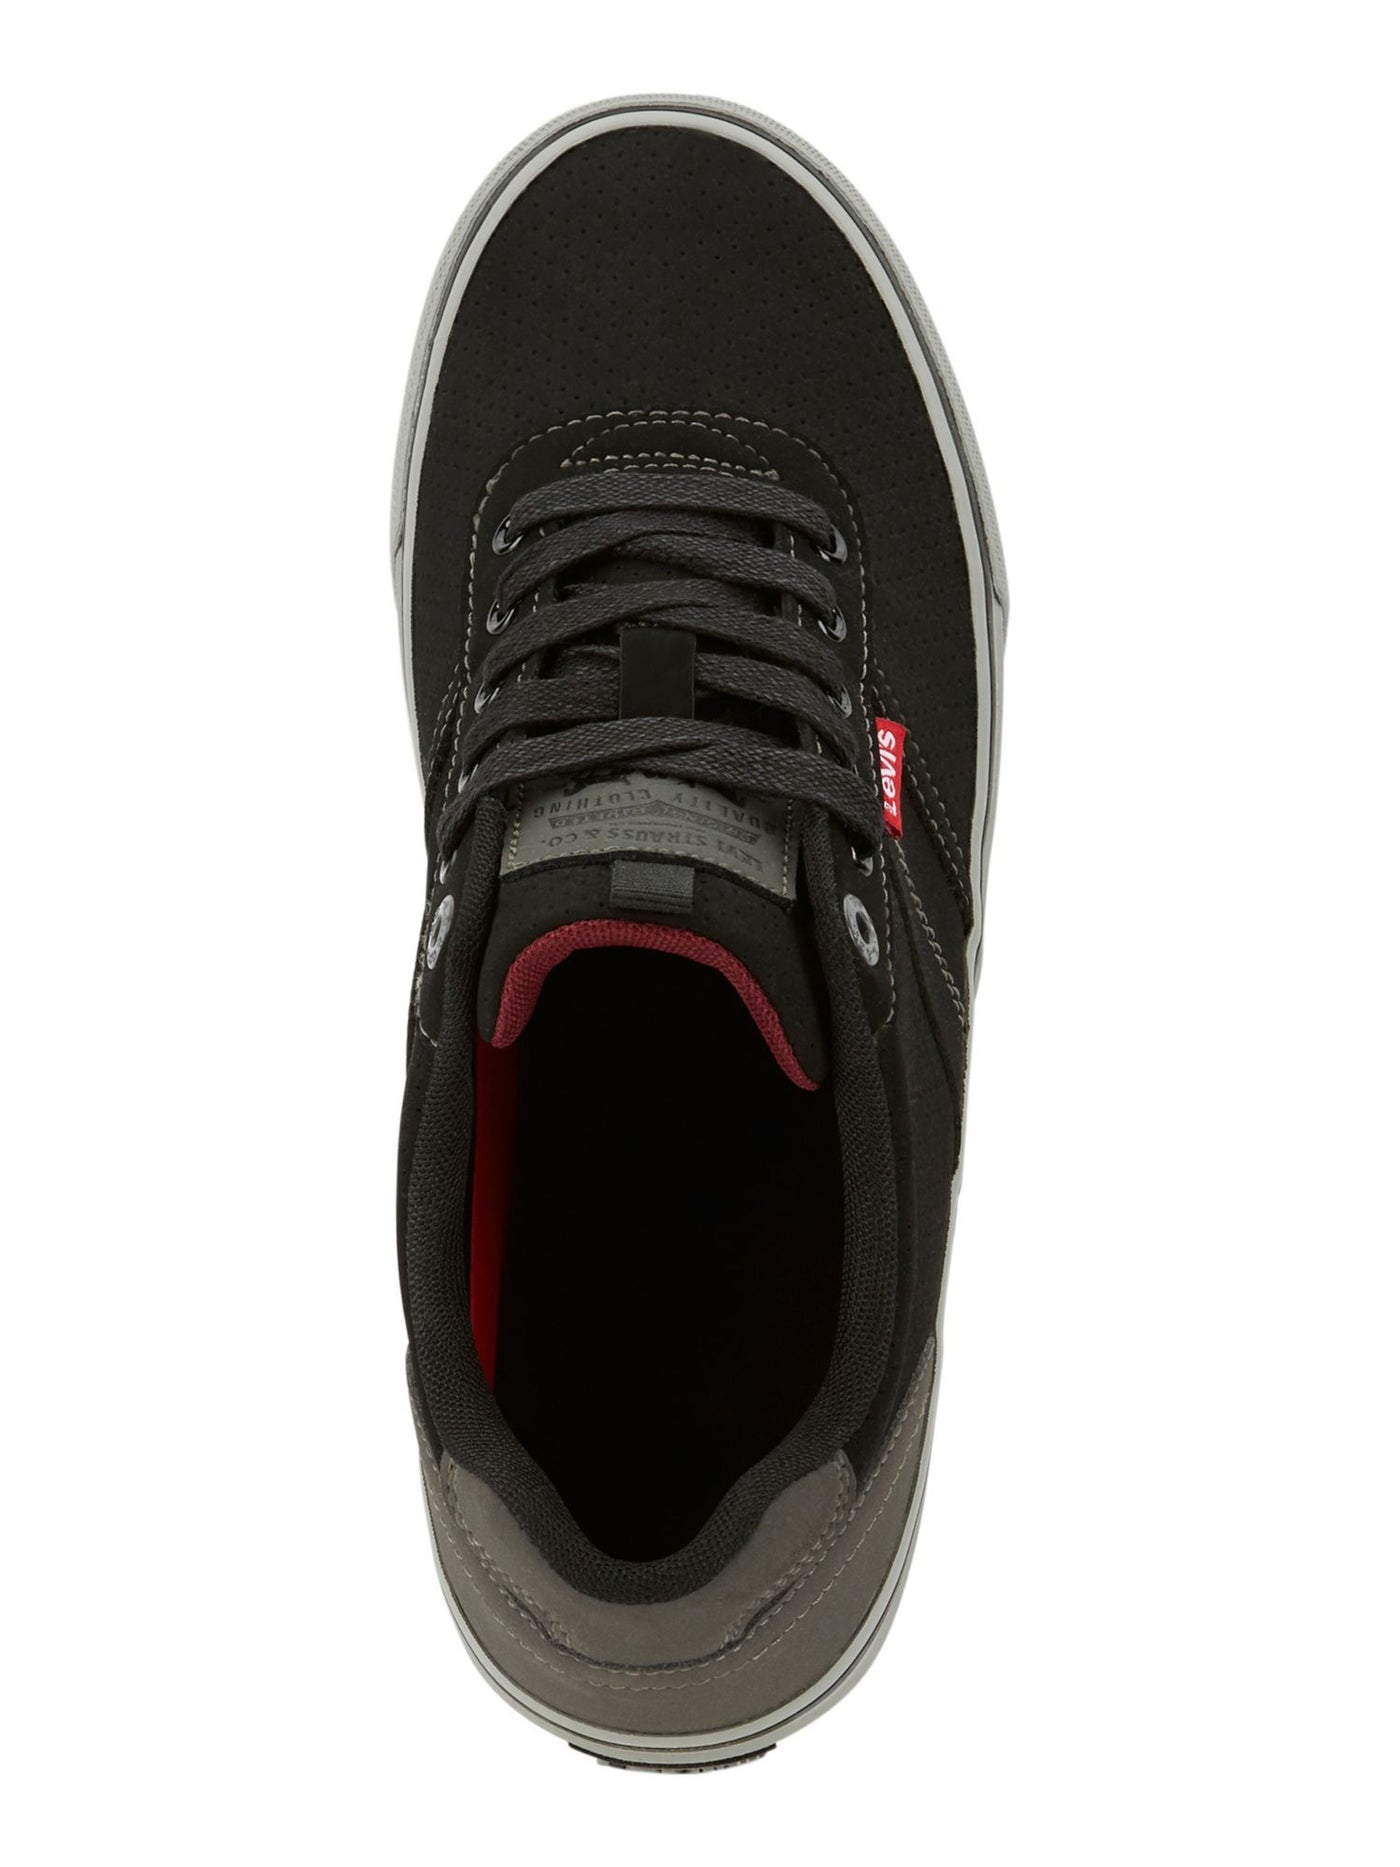 LEVI'S Mens Black Perforated Cushioned Miles Round Toe Lace-Up Sneakers Shoes 10